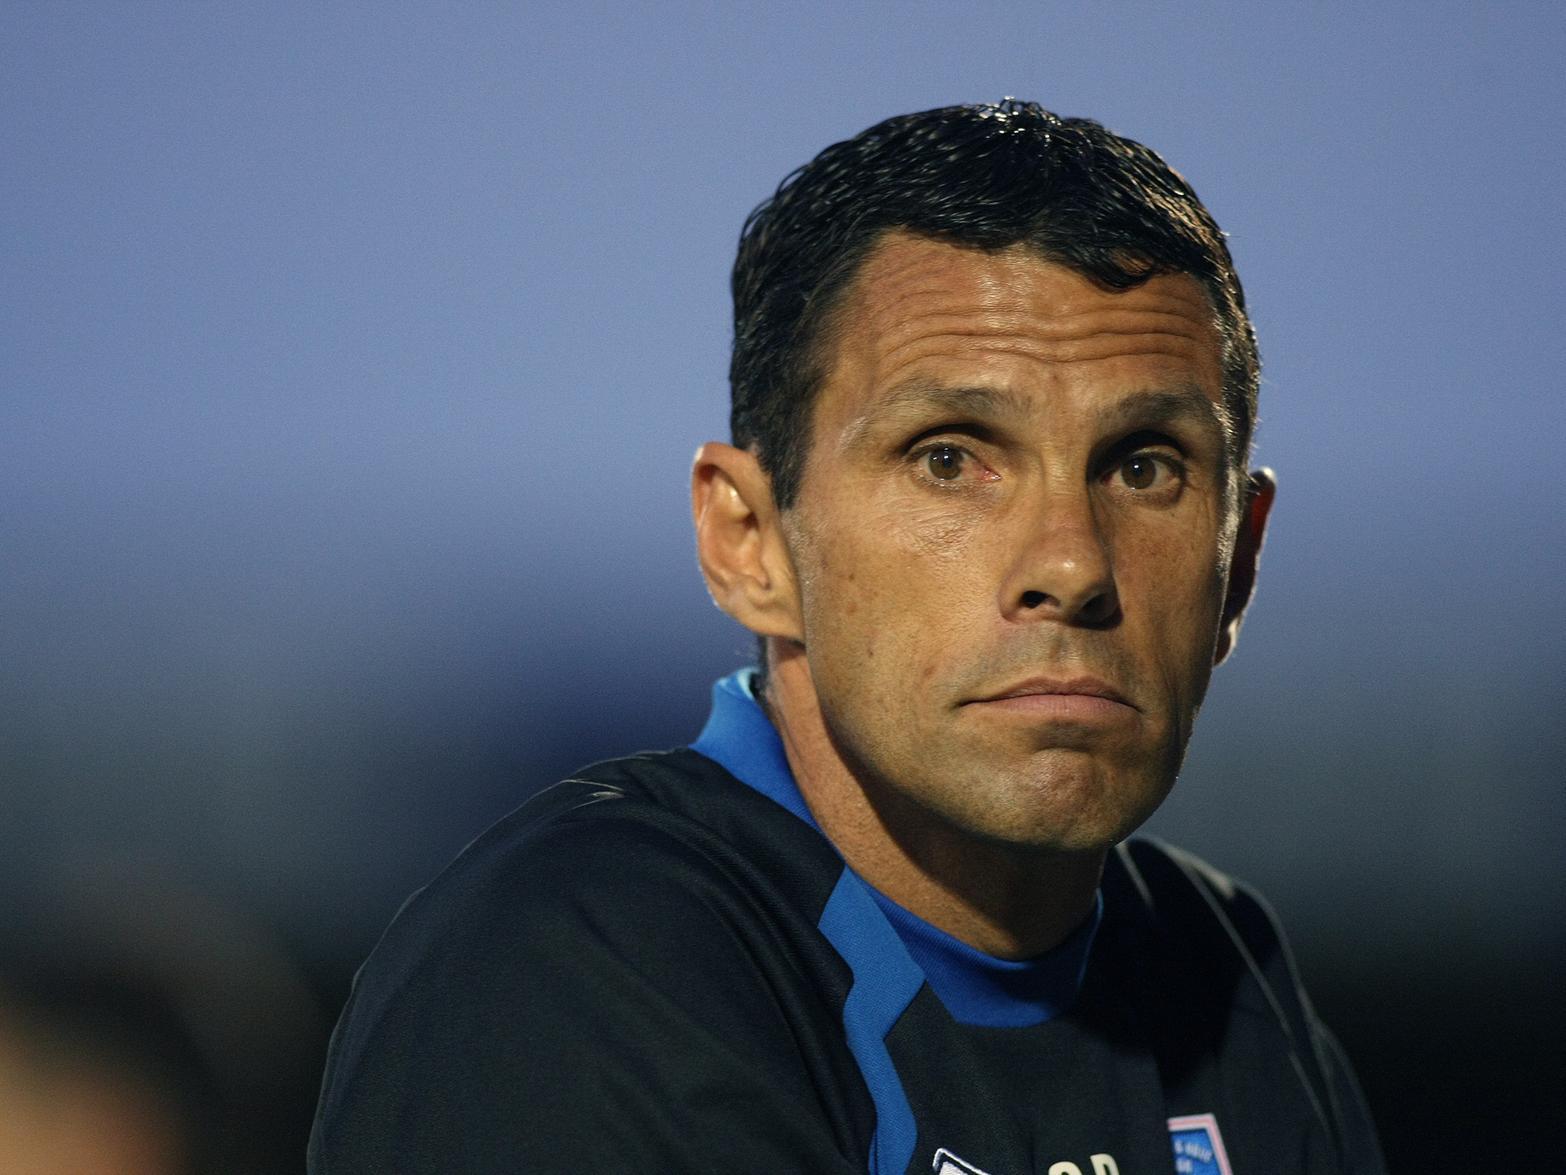 Poyet was most recently the manager of Ligue 1 side Bordeaux.